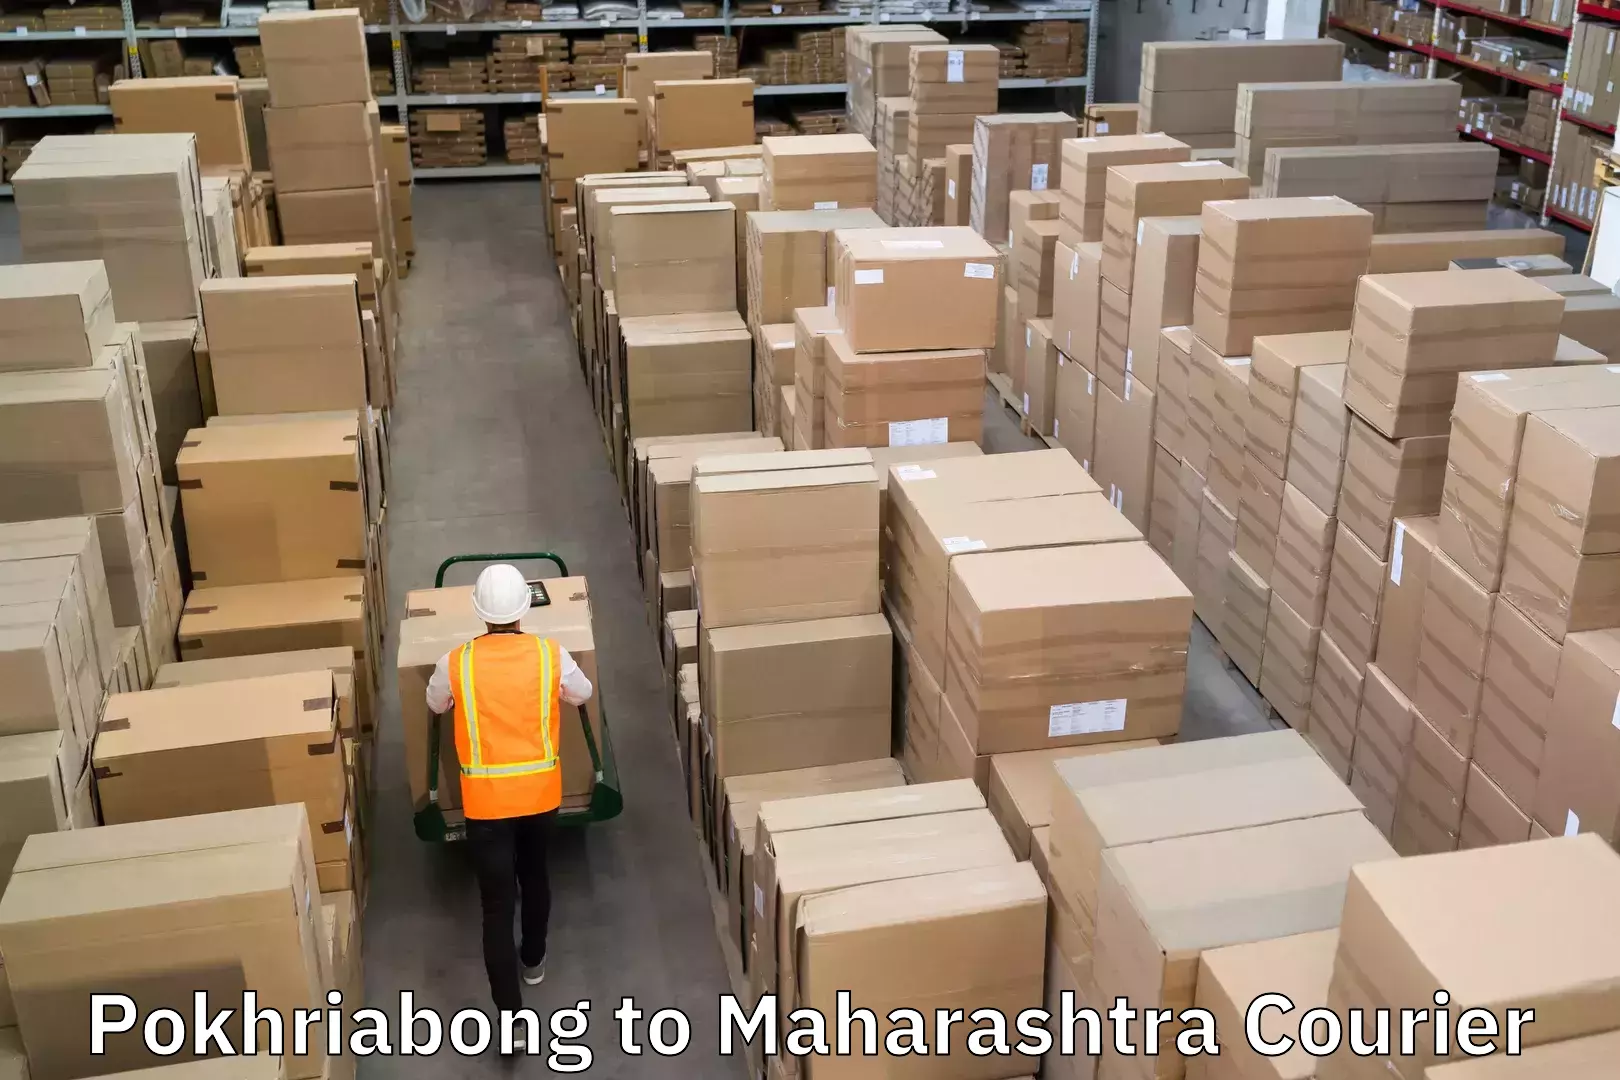 State-of-the-art courier technology Pokhriabong to Maharashtra